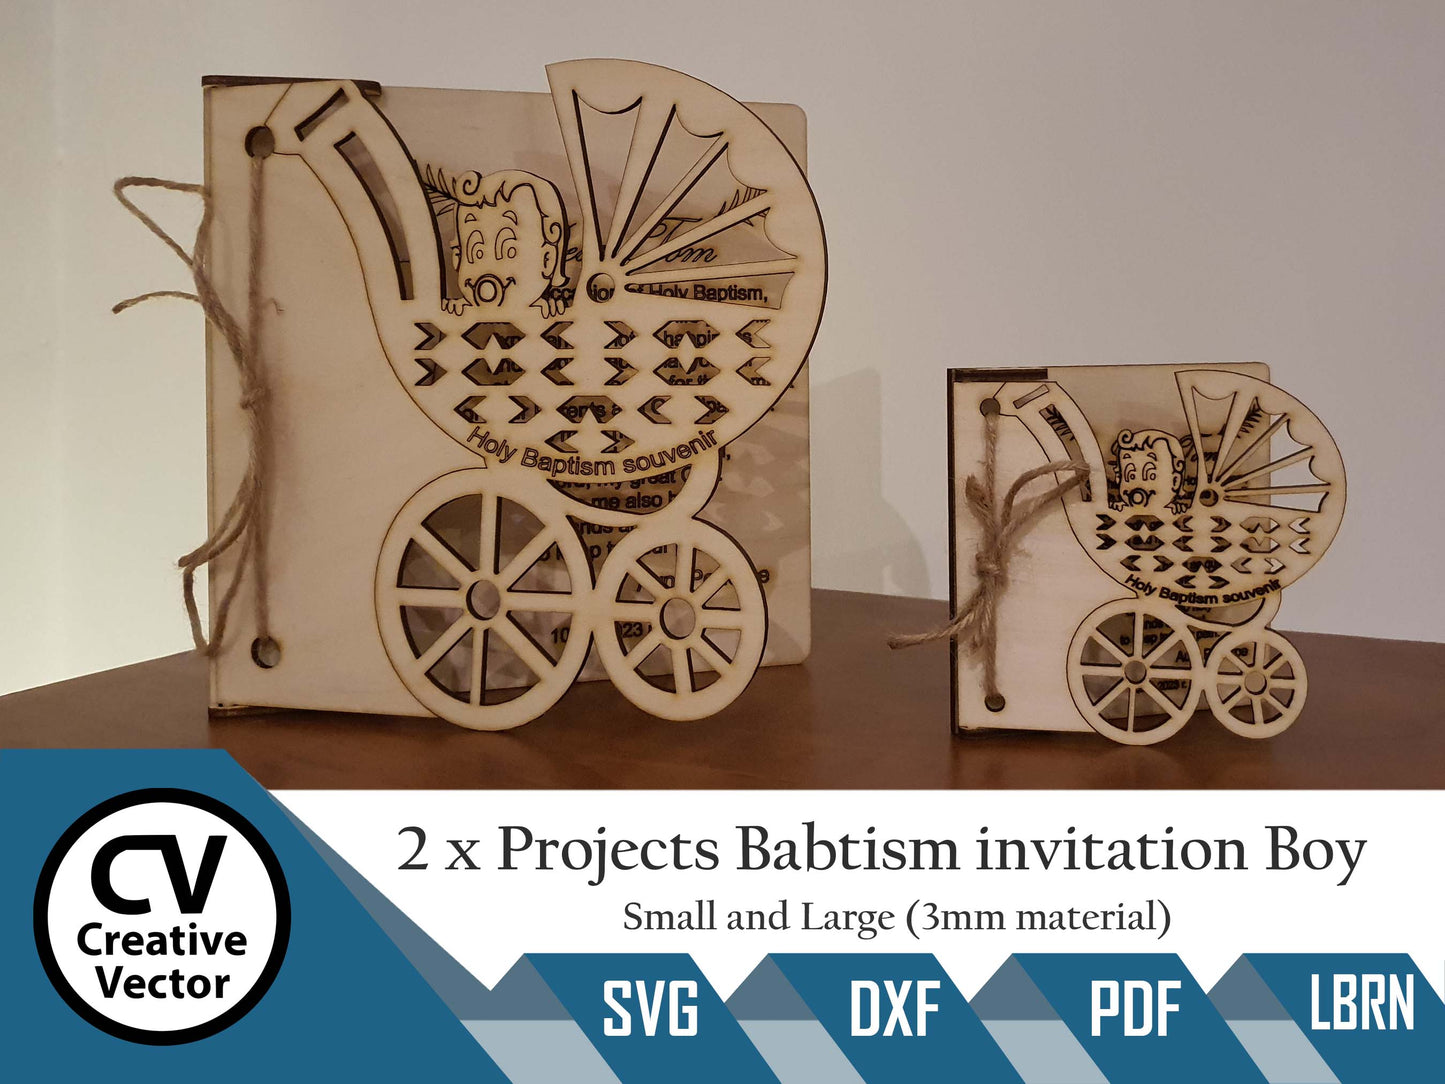 2 x Projects small and Large Baptism Invitation for Boy